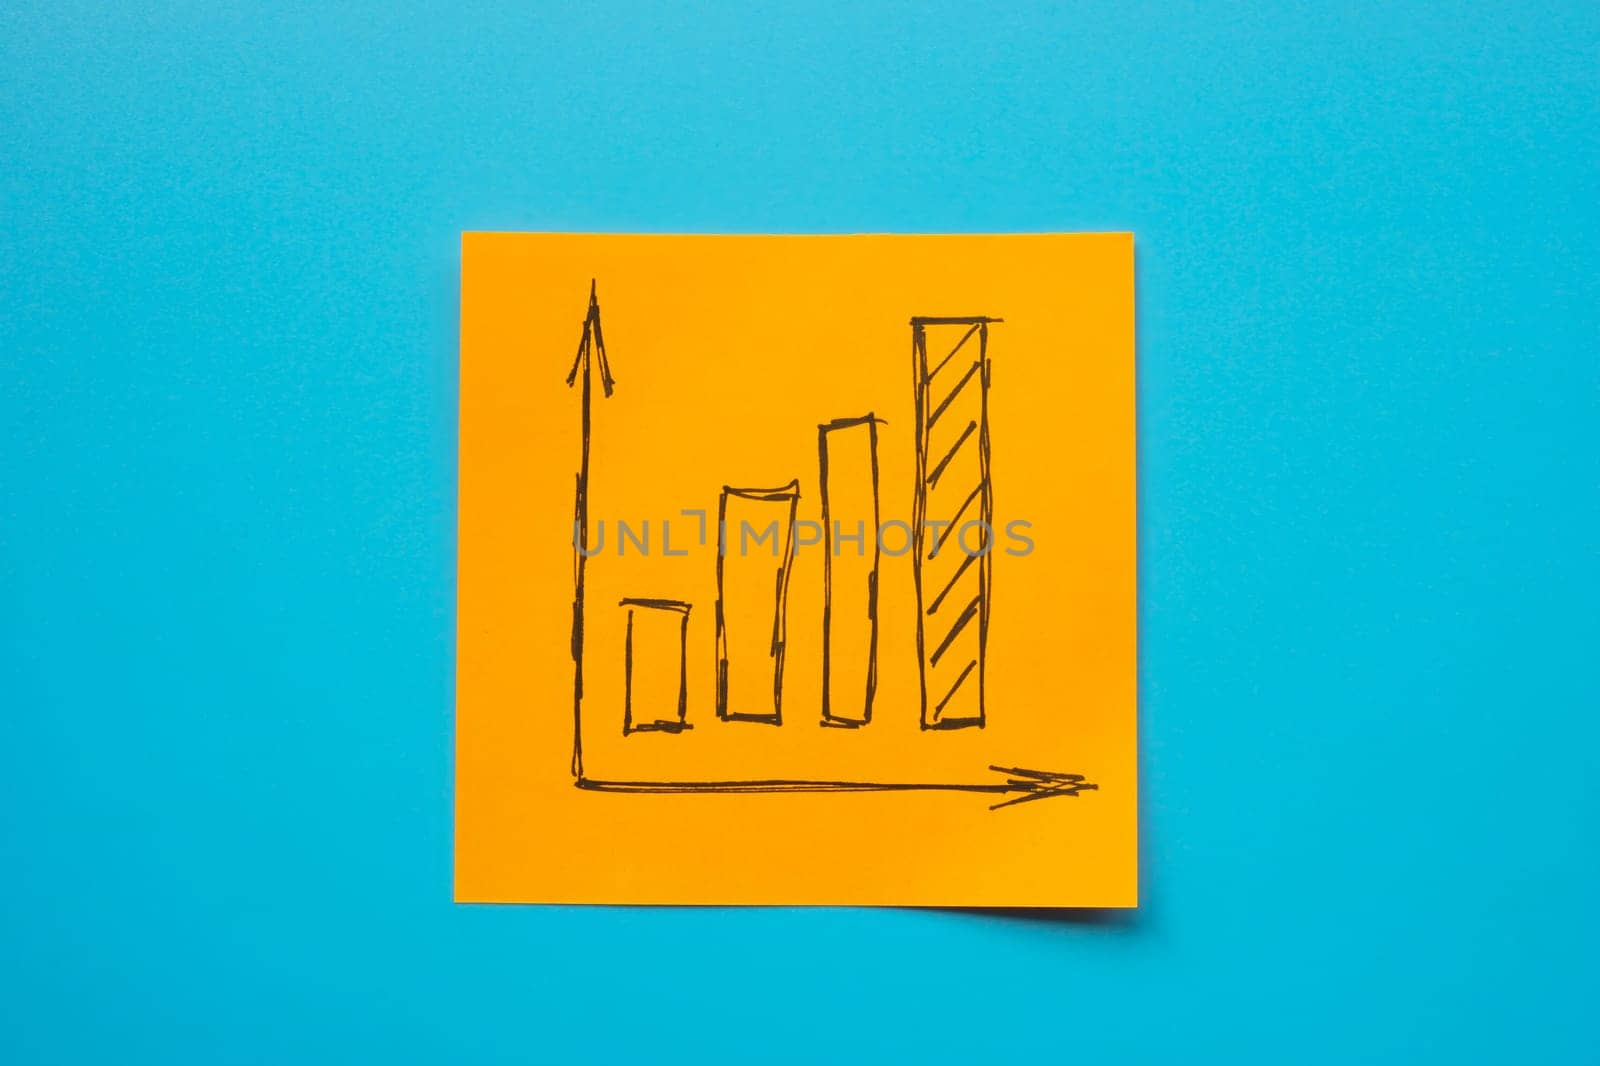 An orange sticker with a growing graph symbolizing business success, growth and increase. by designer491